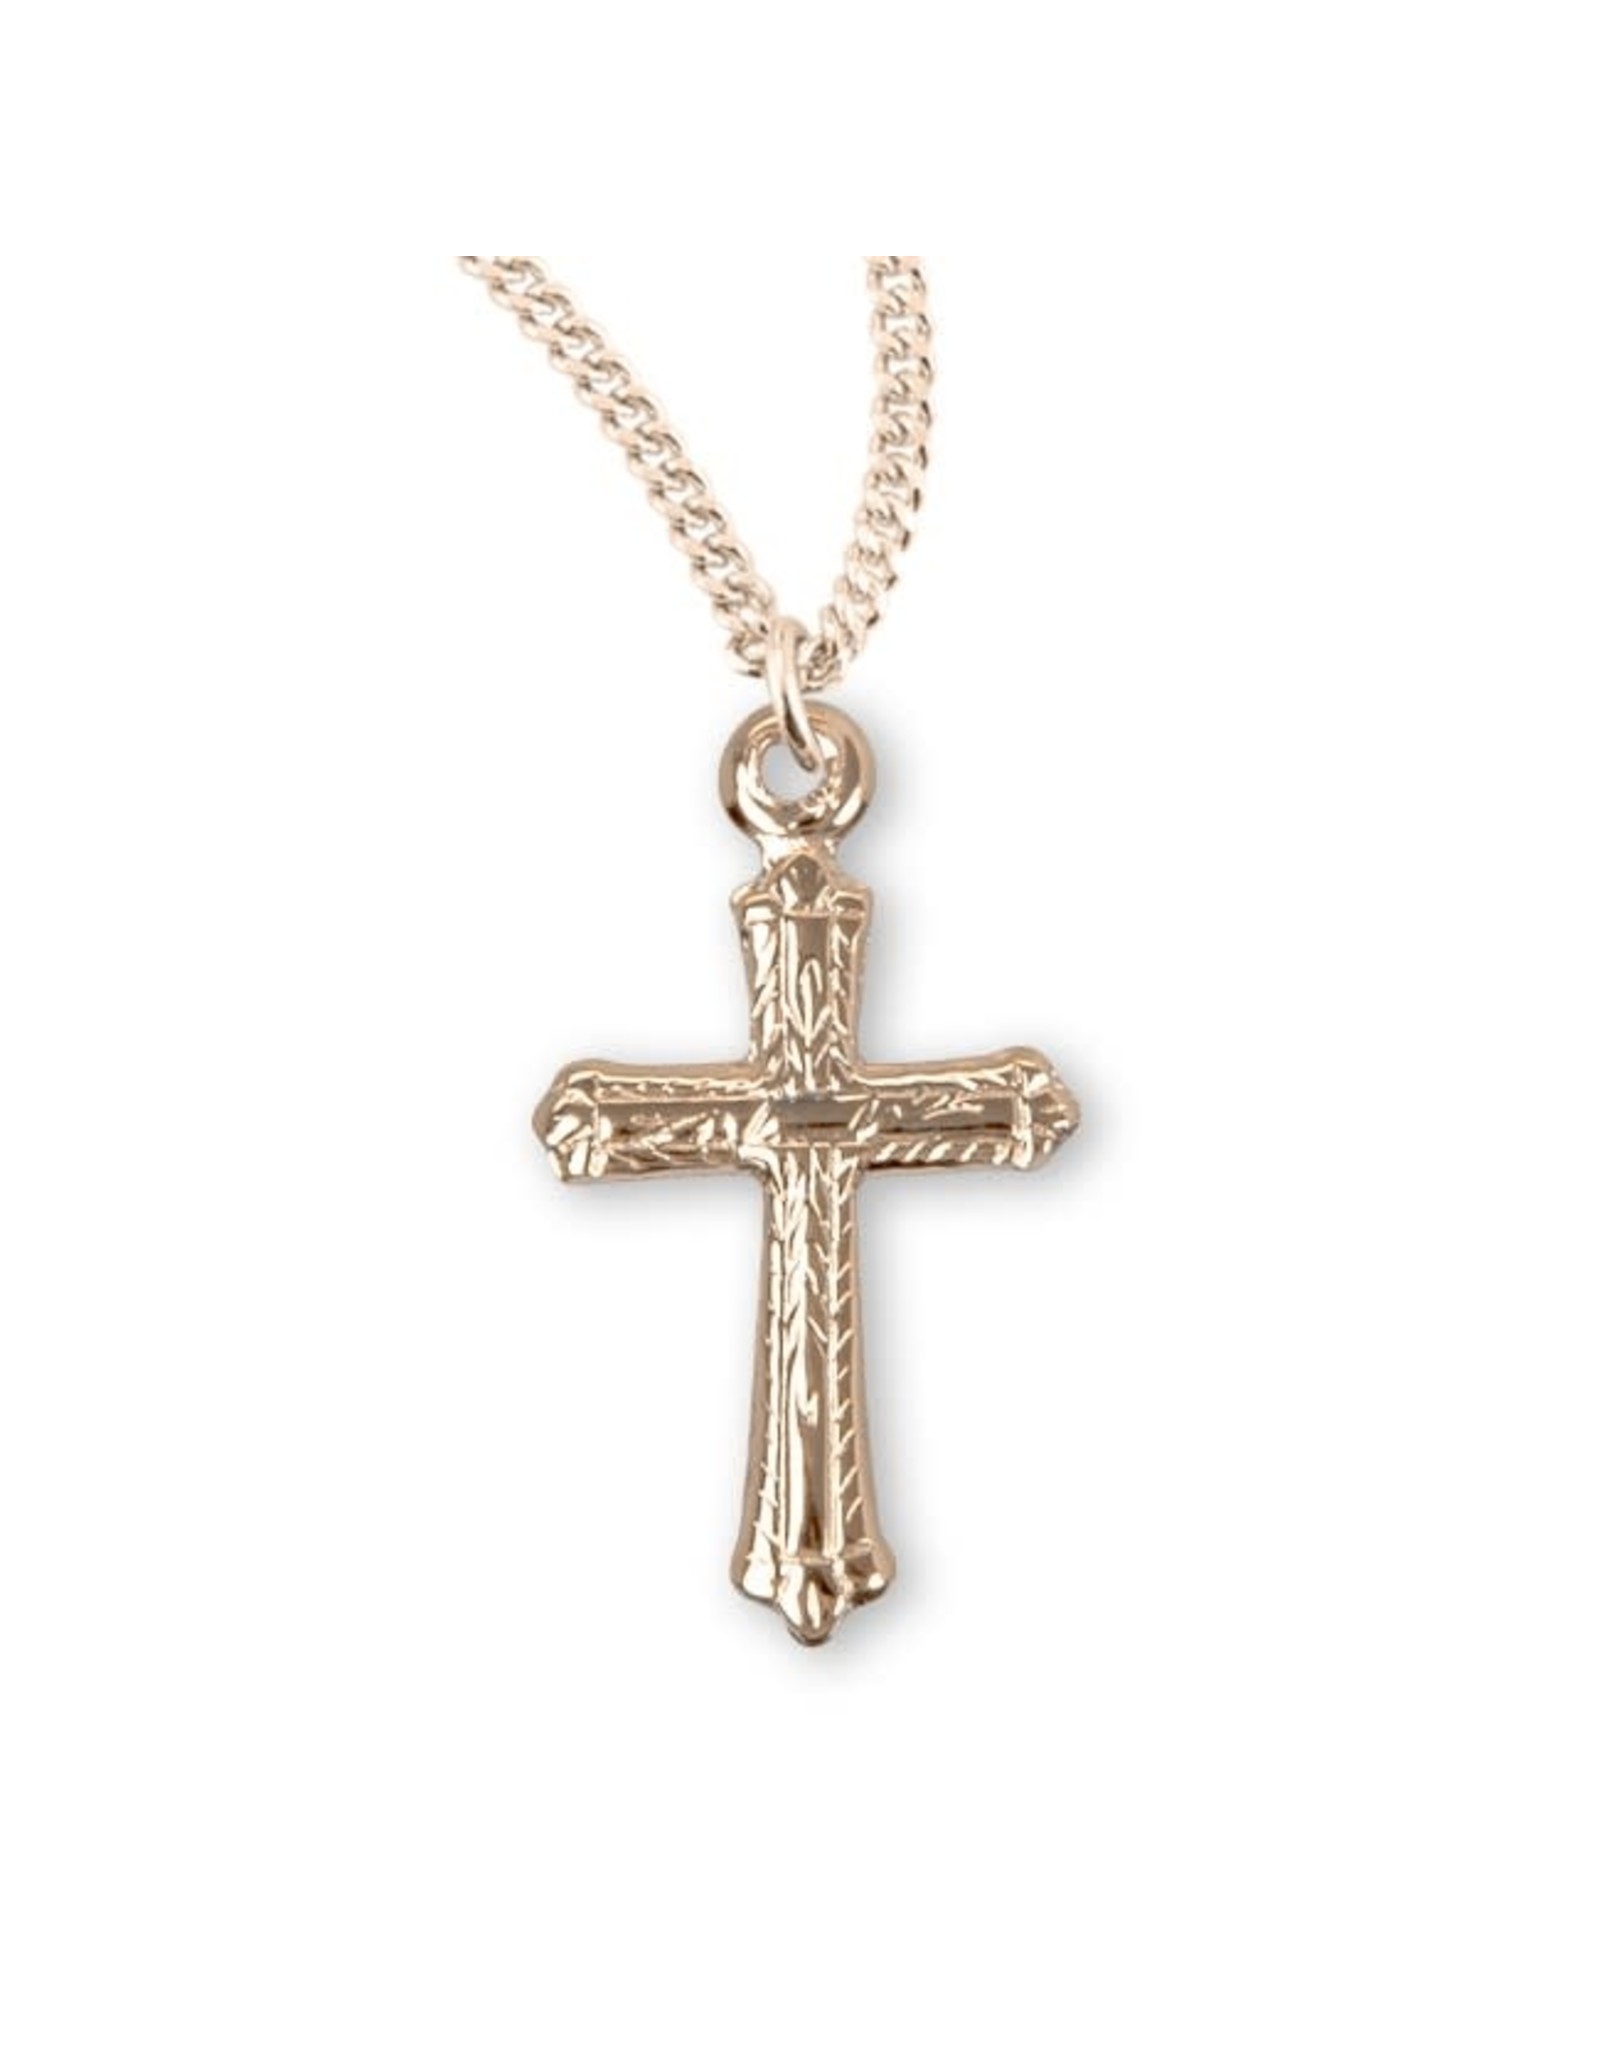 HMH Cross Medal, Detailed - Gold over Sterling Silver on 18" Chain